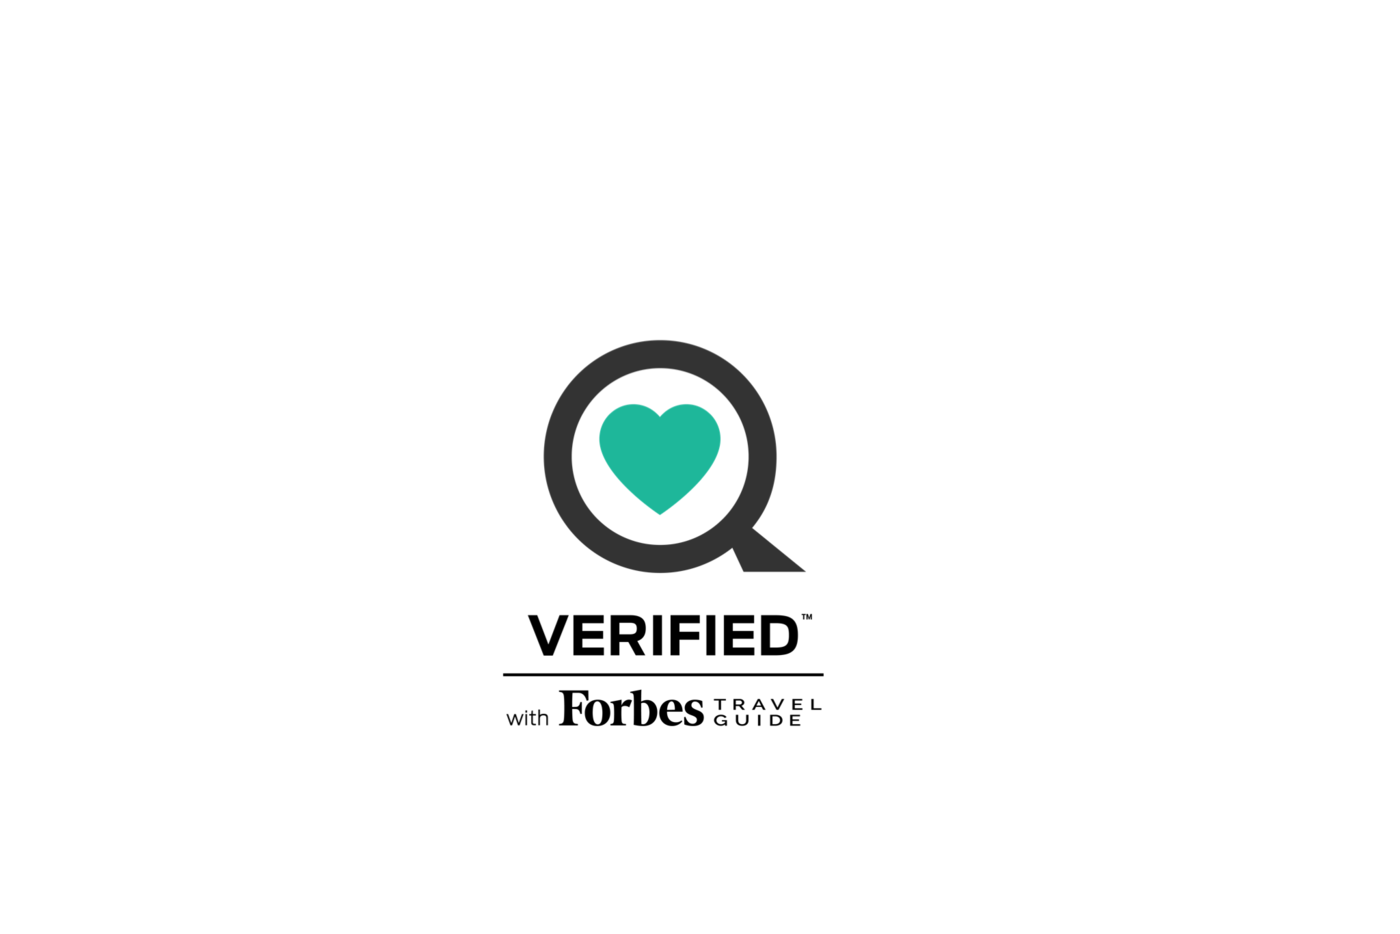 Image of Verified by Forbes Travel Guide logo